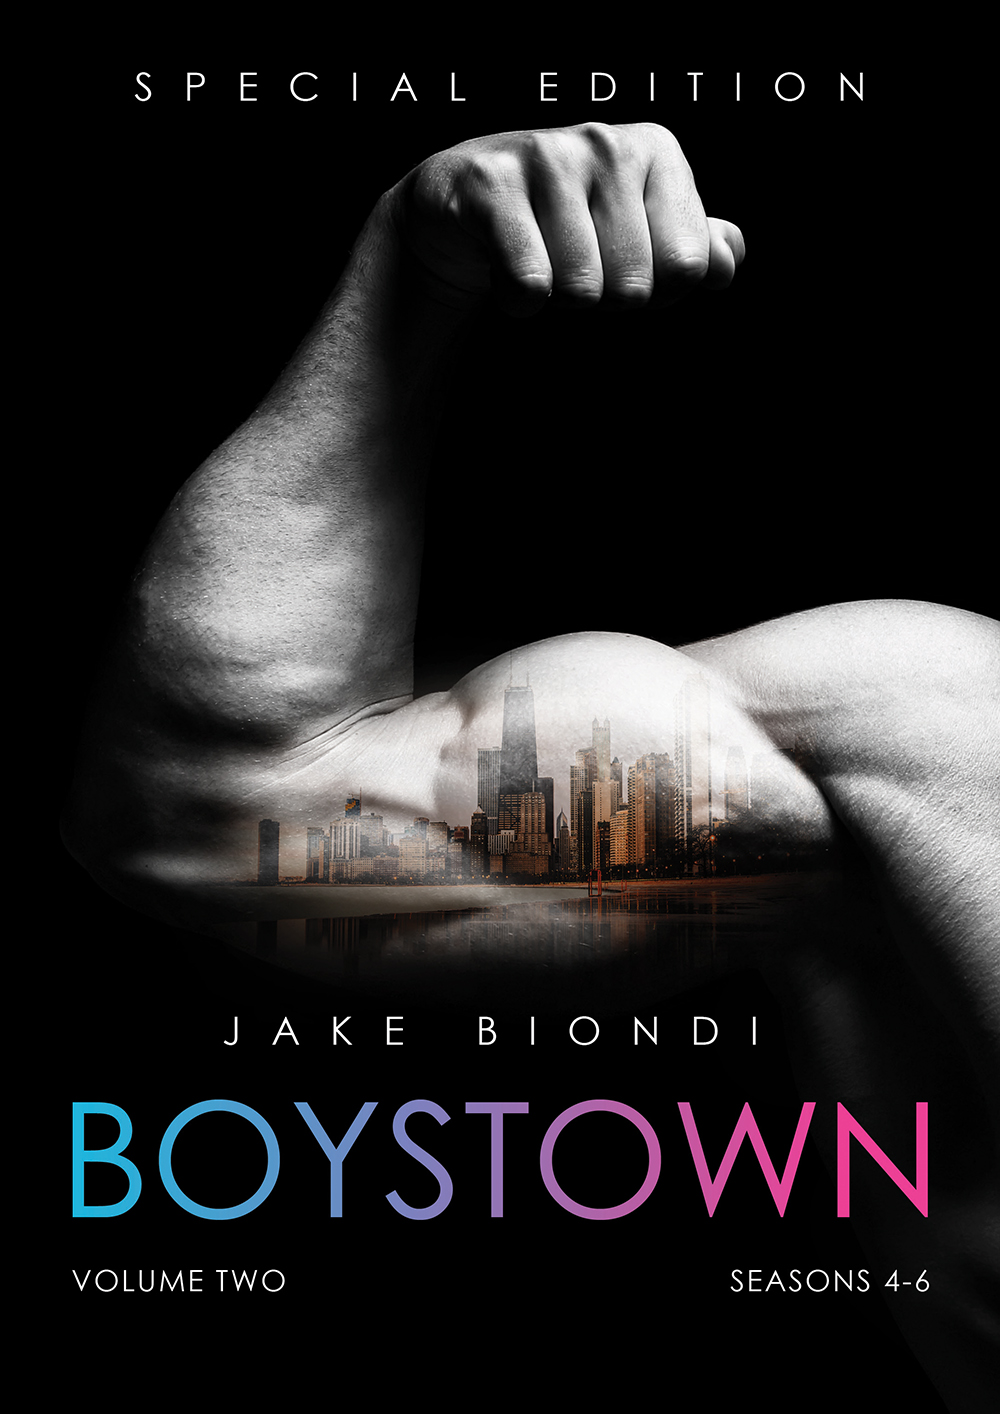 BT190001 Boystown Book Cover Options FINAL 7×10.indd